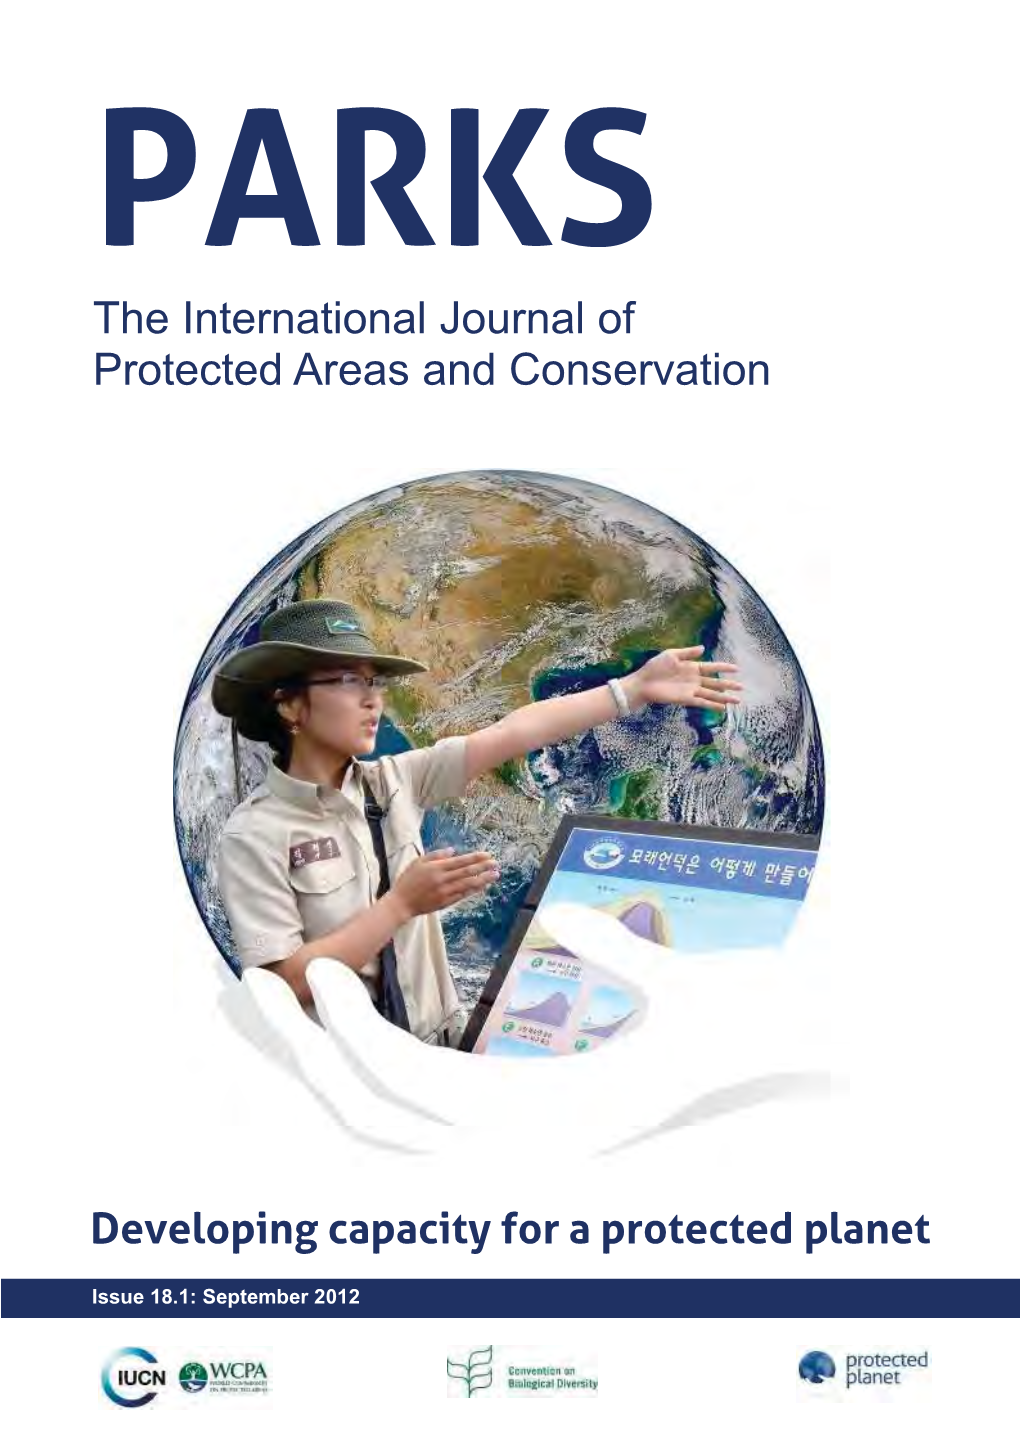 Parks: the International Journal of Protected Areas and Conservation